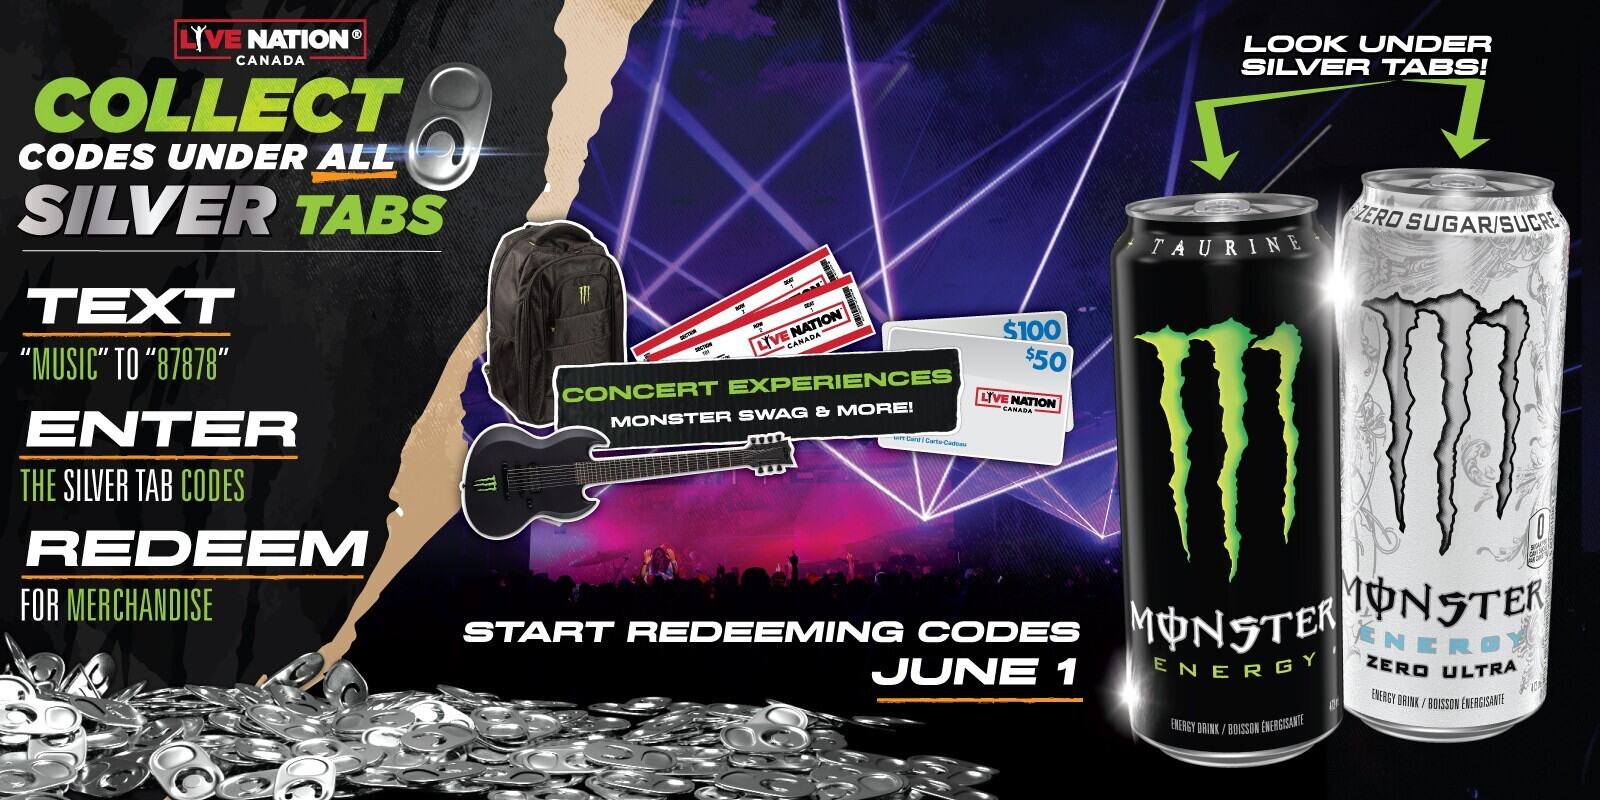 The 21 Monster Energy X Live Nation Under The Silver Tab Promotion